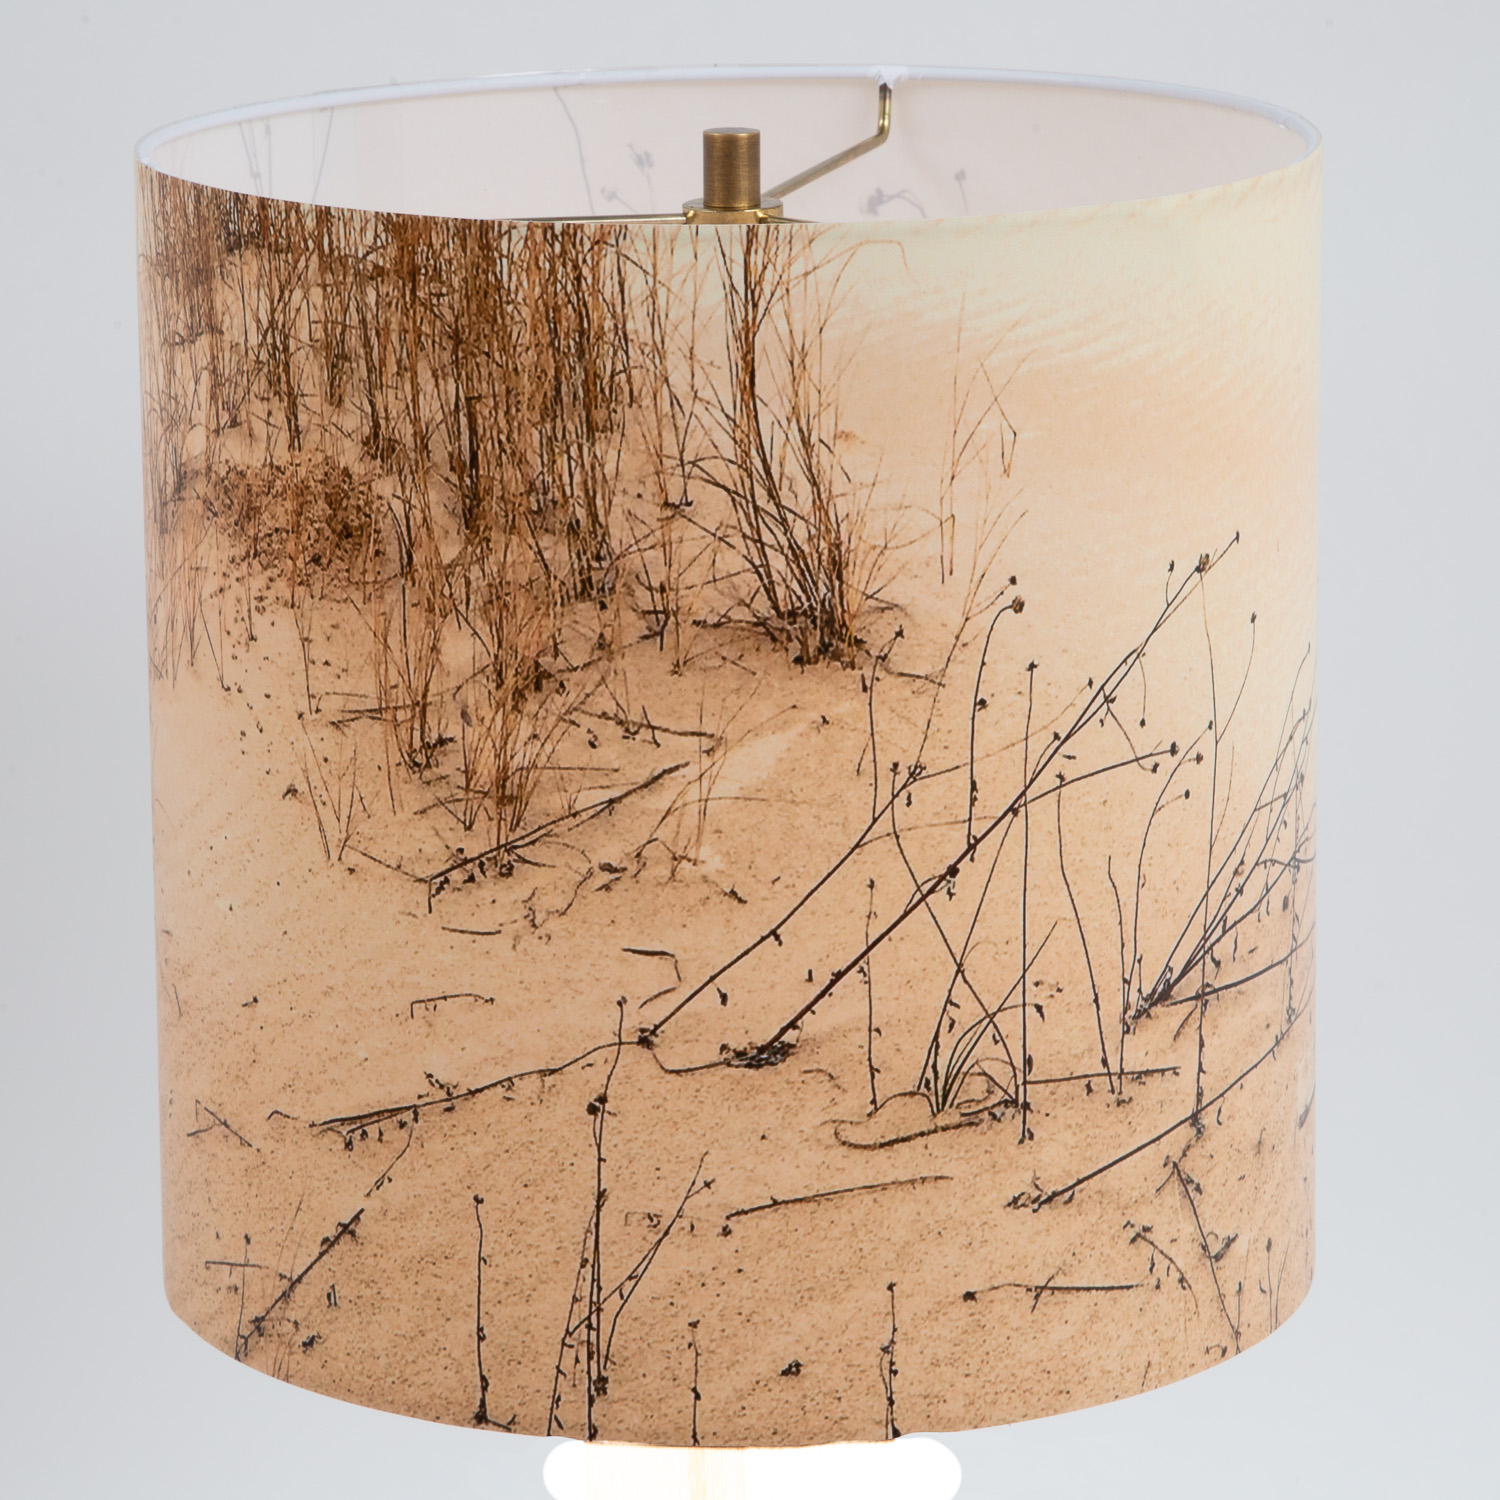 157: Struggle to grow at Monahans Sandhills State Park, Texas -- Photo on Lamp shade by David Elmore